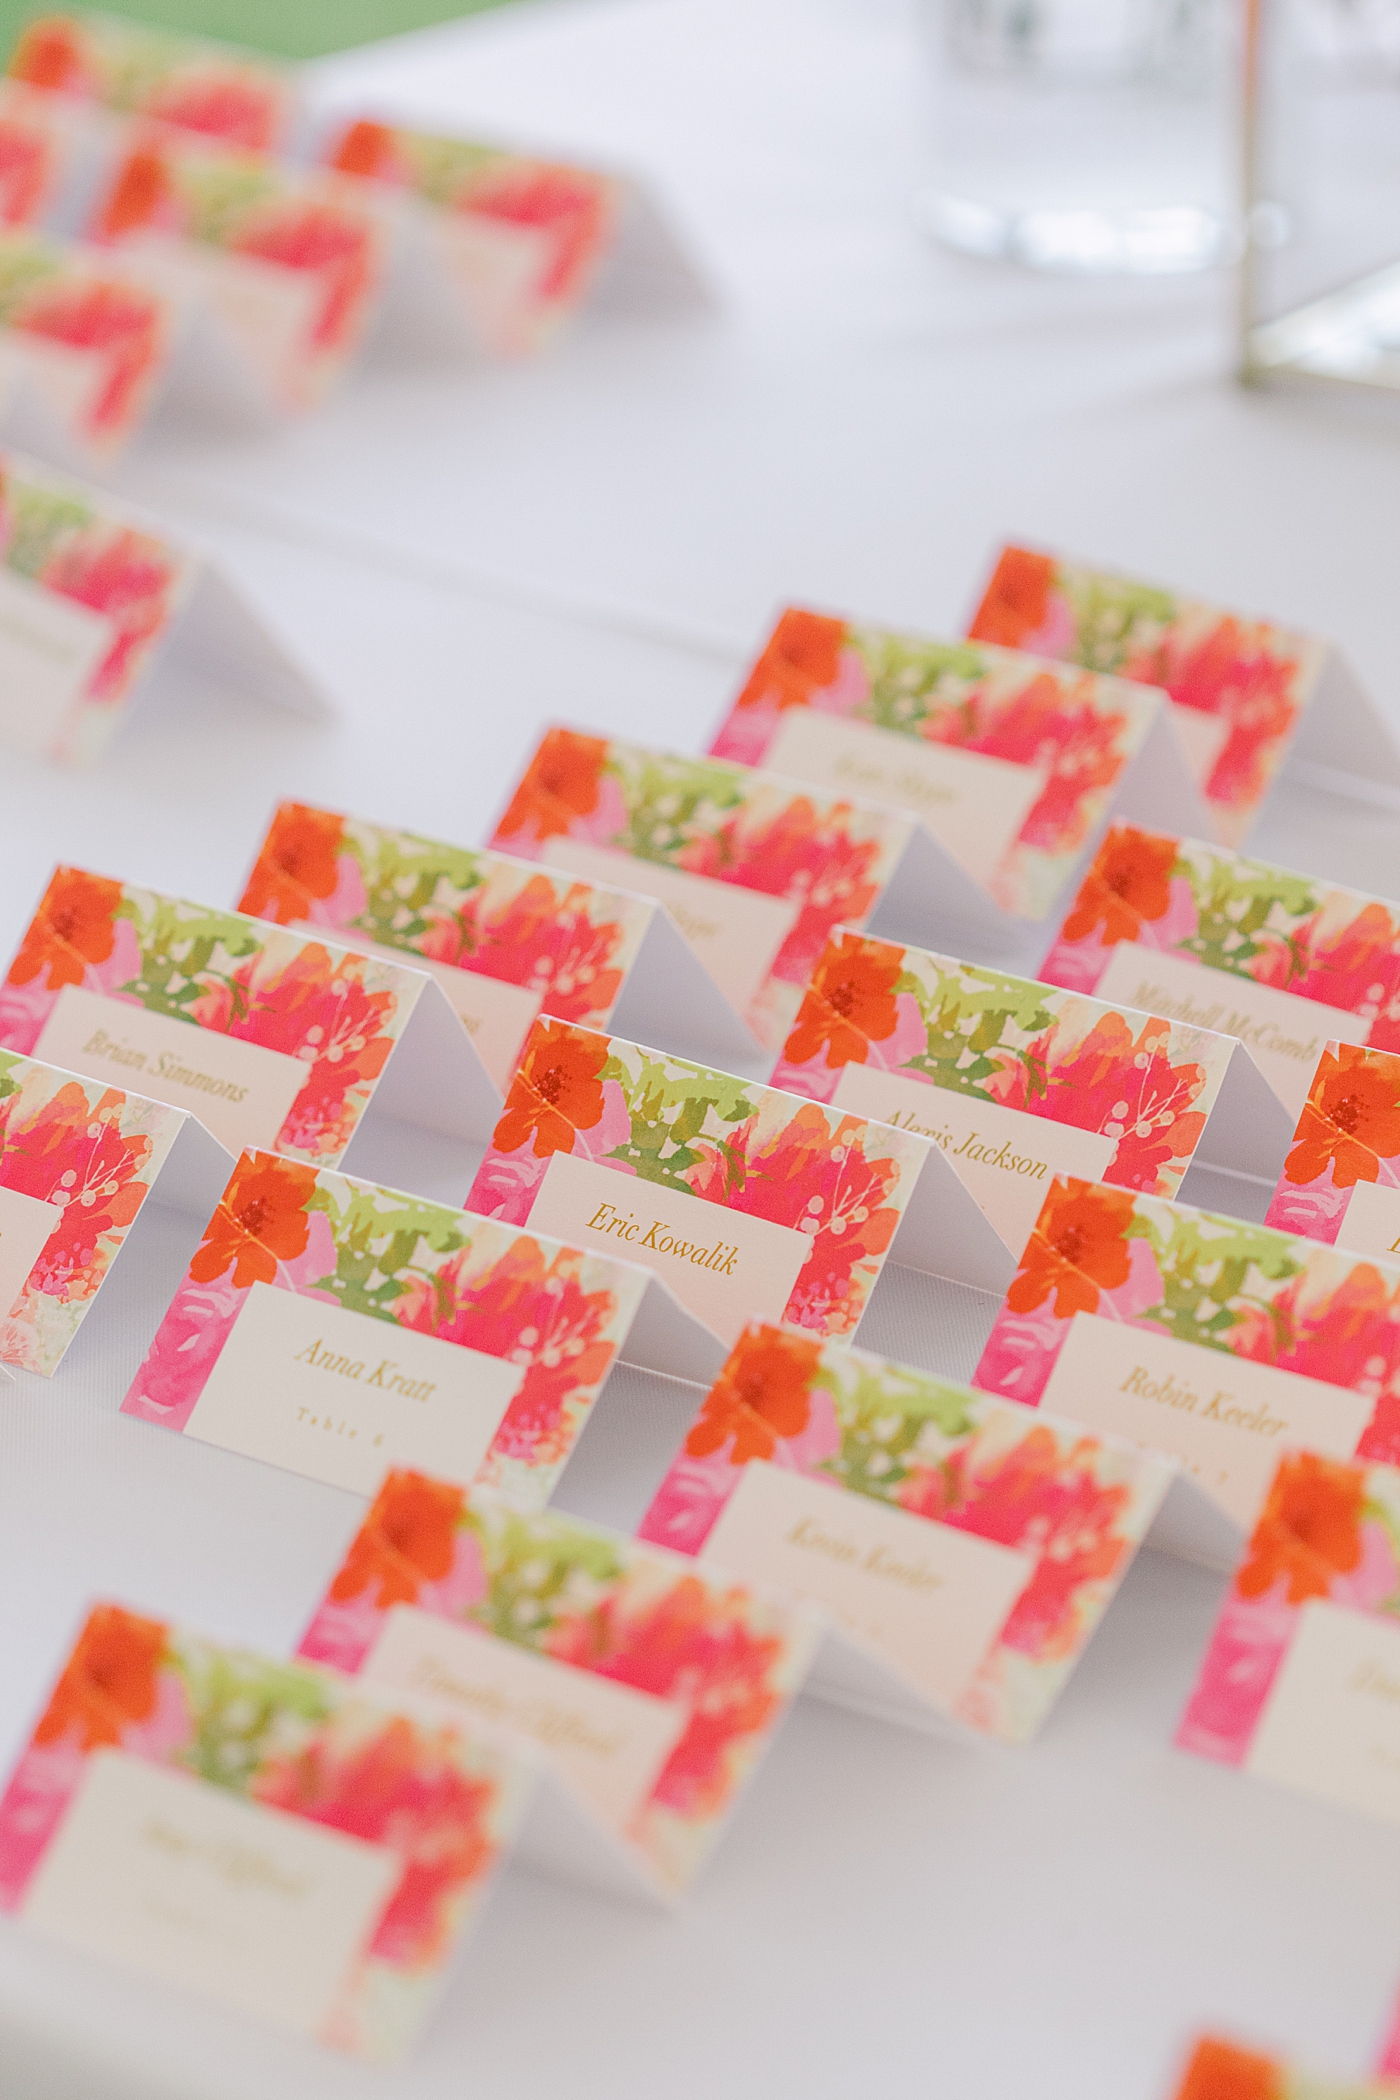 Floral seating chart cards with guest names | Image by Hope Helmuth Photography